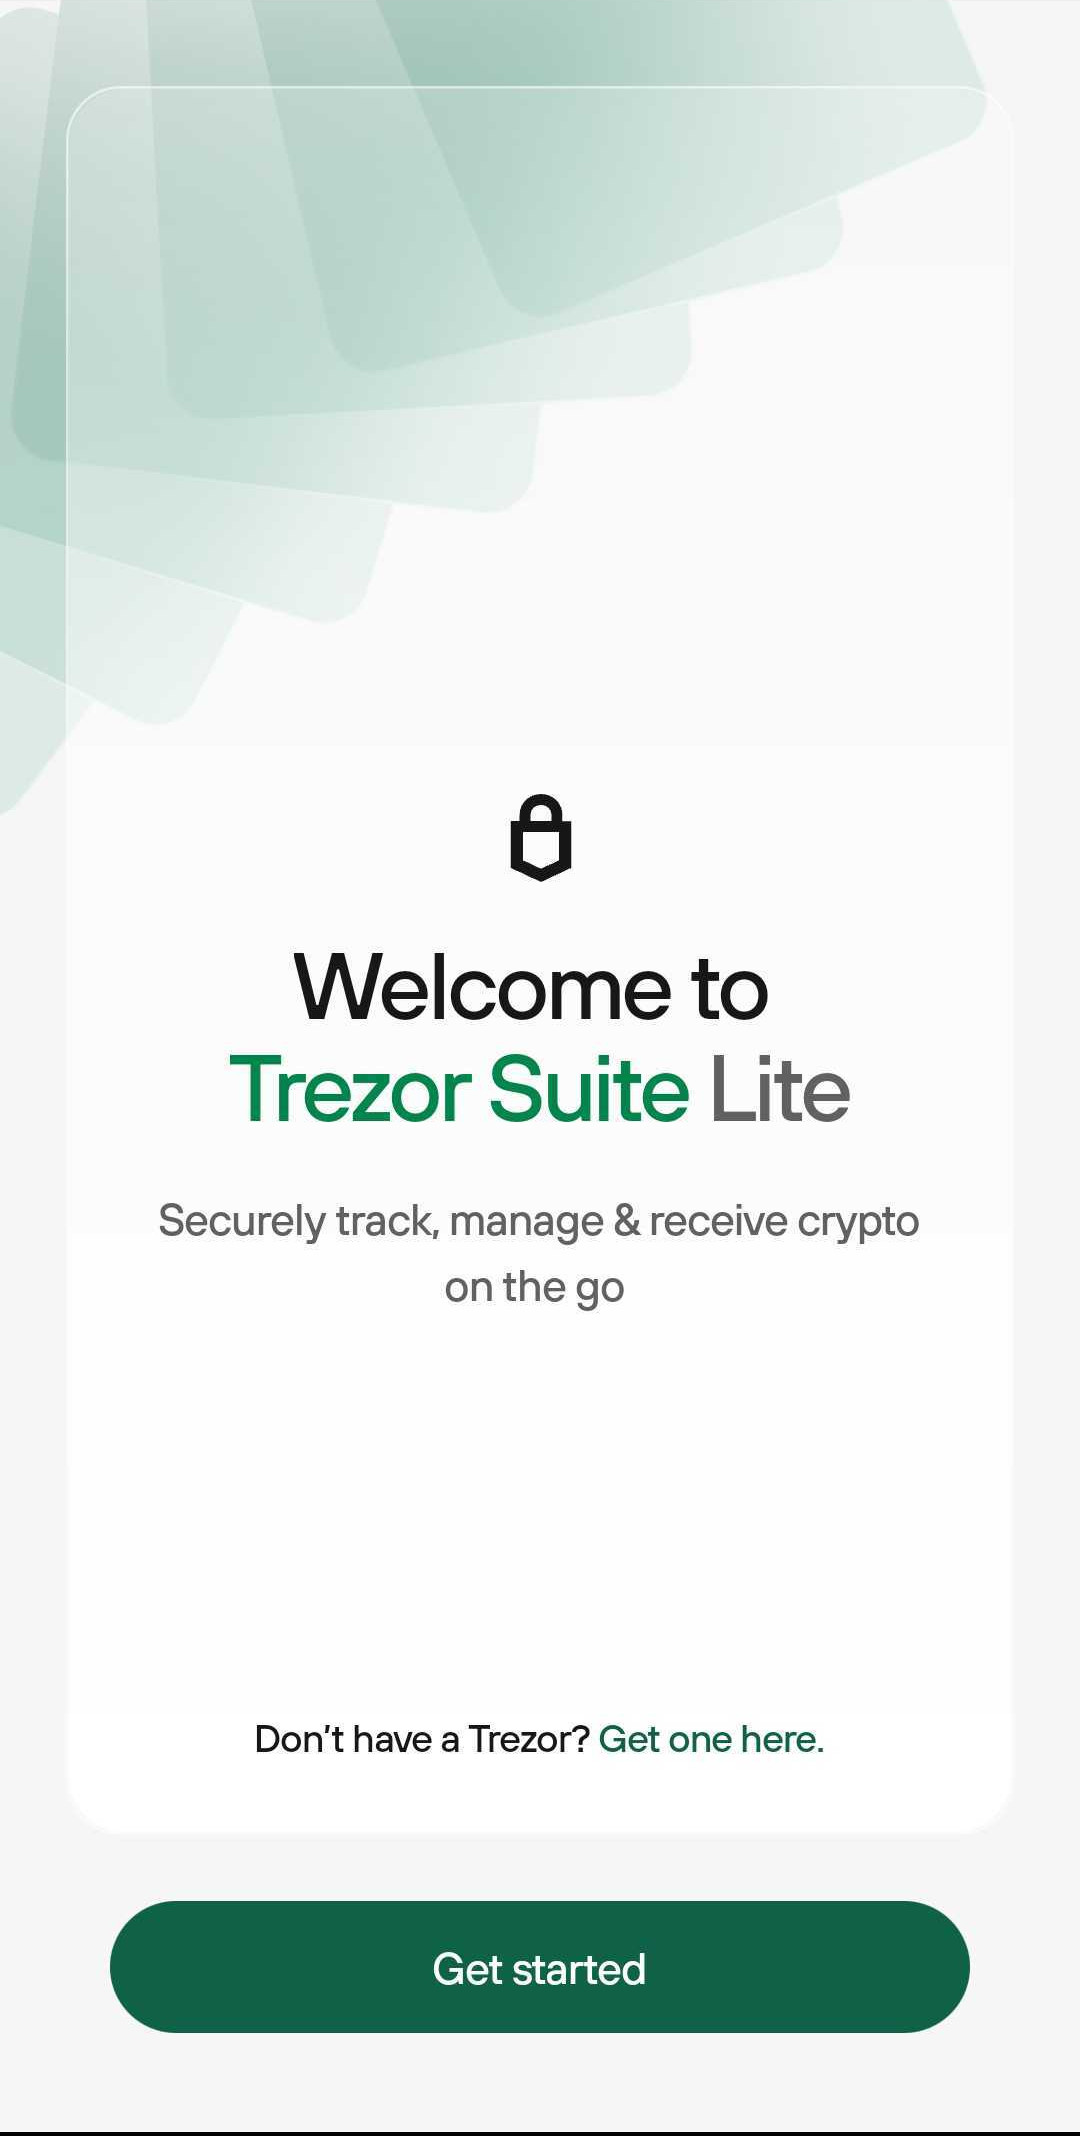 Ultimate Guide on Using Trezor on Qubes - Community Guides - Qubes OS Forum